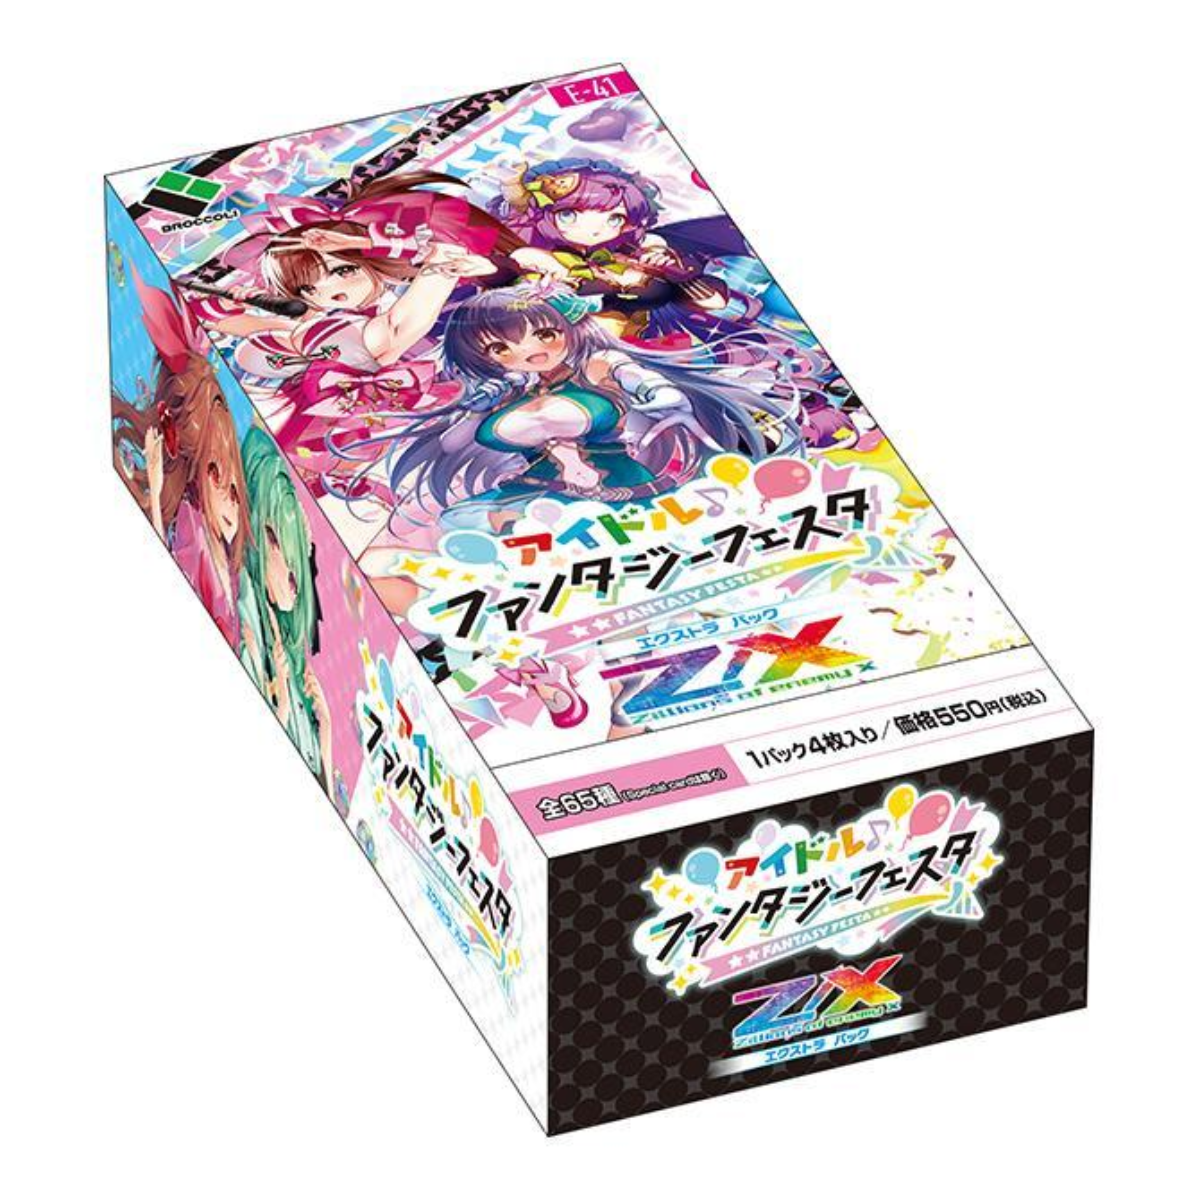 Z/X -Zillions of enemy X- Idol Fantasy Festa The Extra Pack The 41st [ZX-E-41] (Japanese)-EX Box (10 packs)-Broccoli-Ace Cards &amp; Collectibles